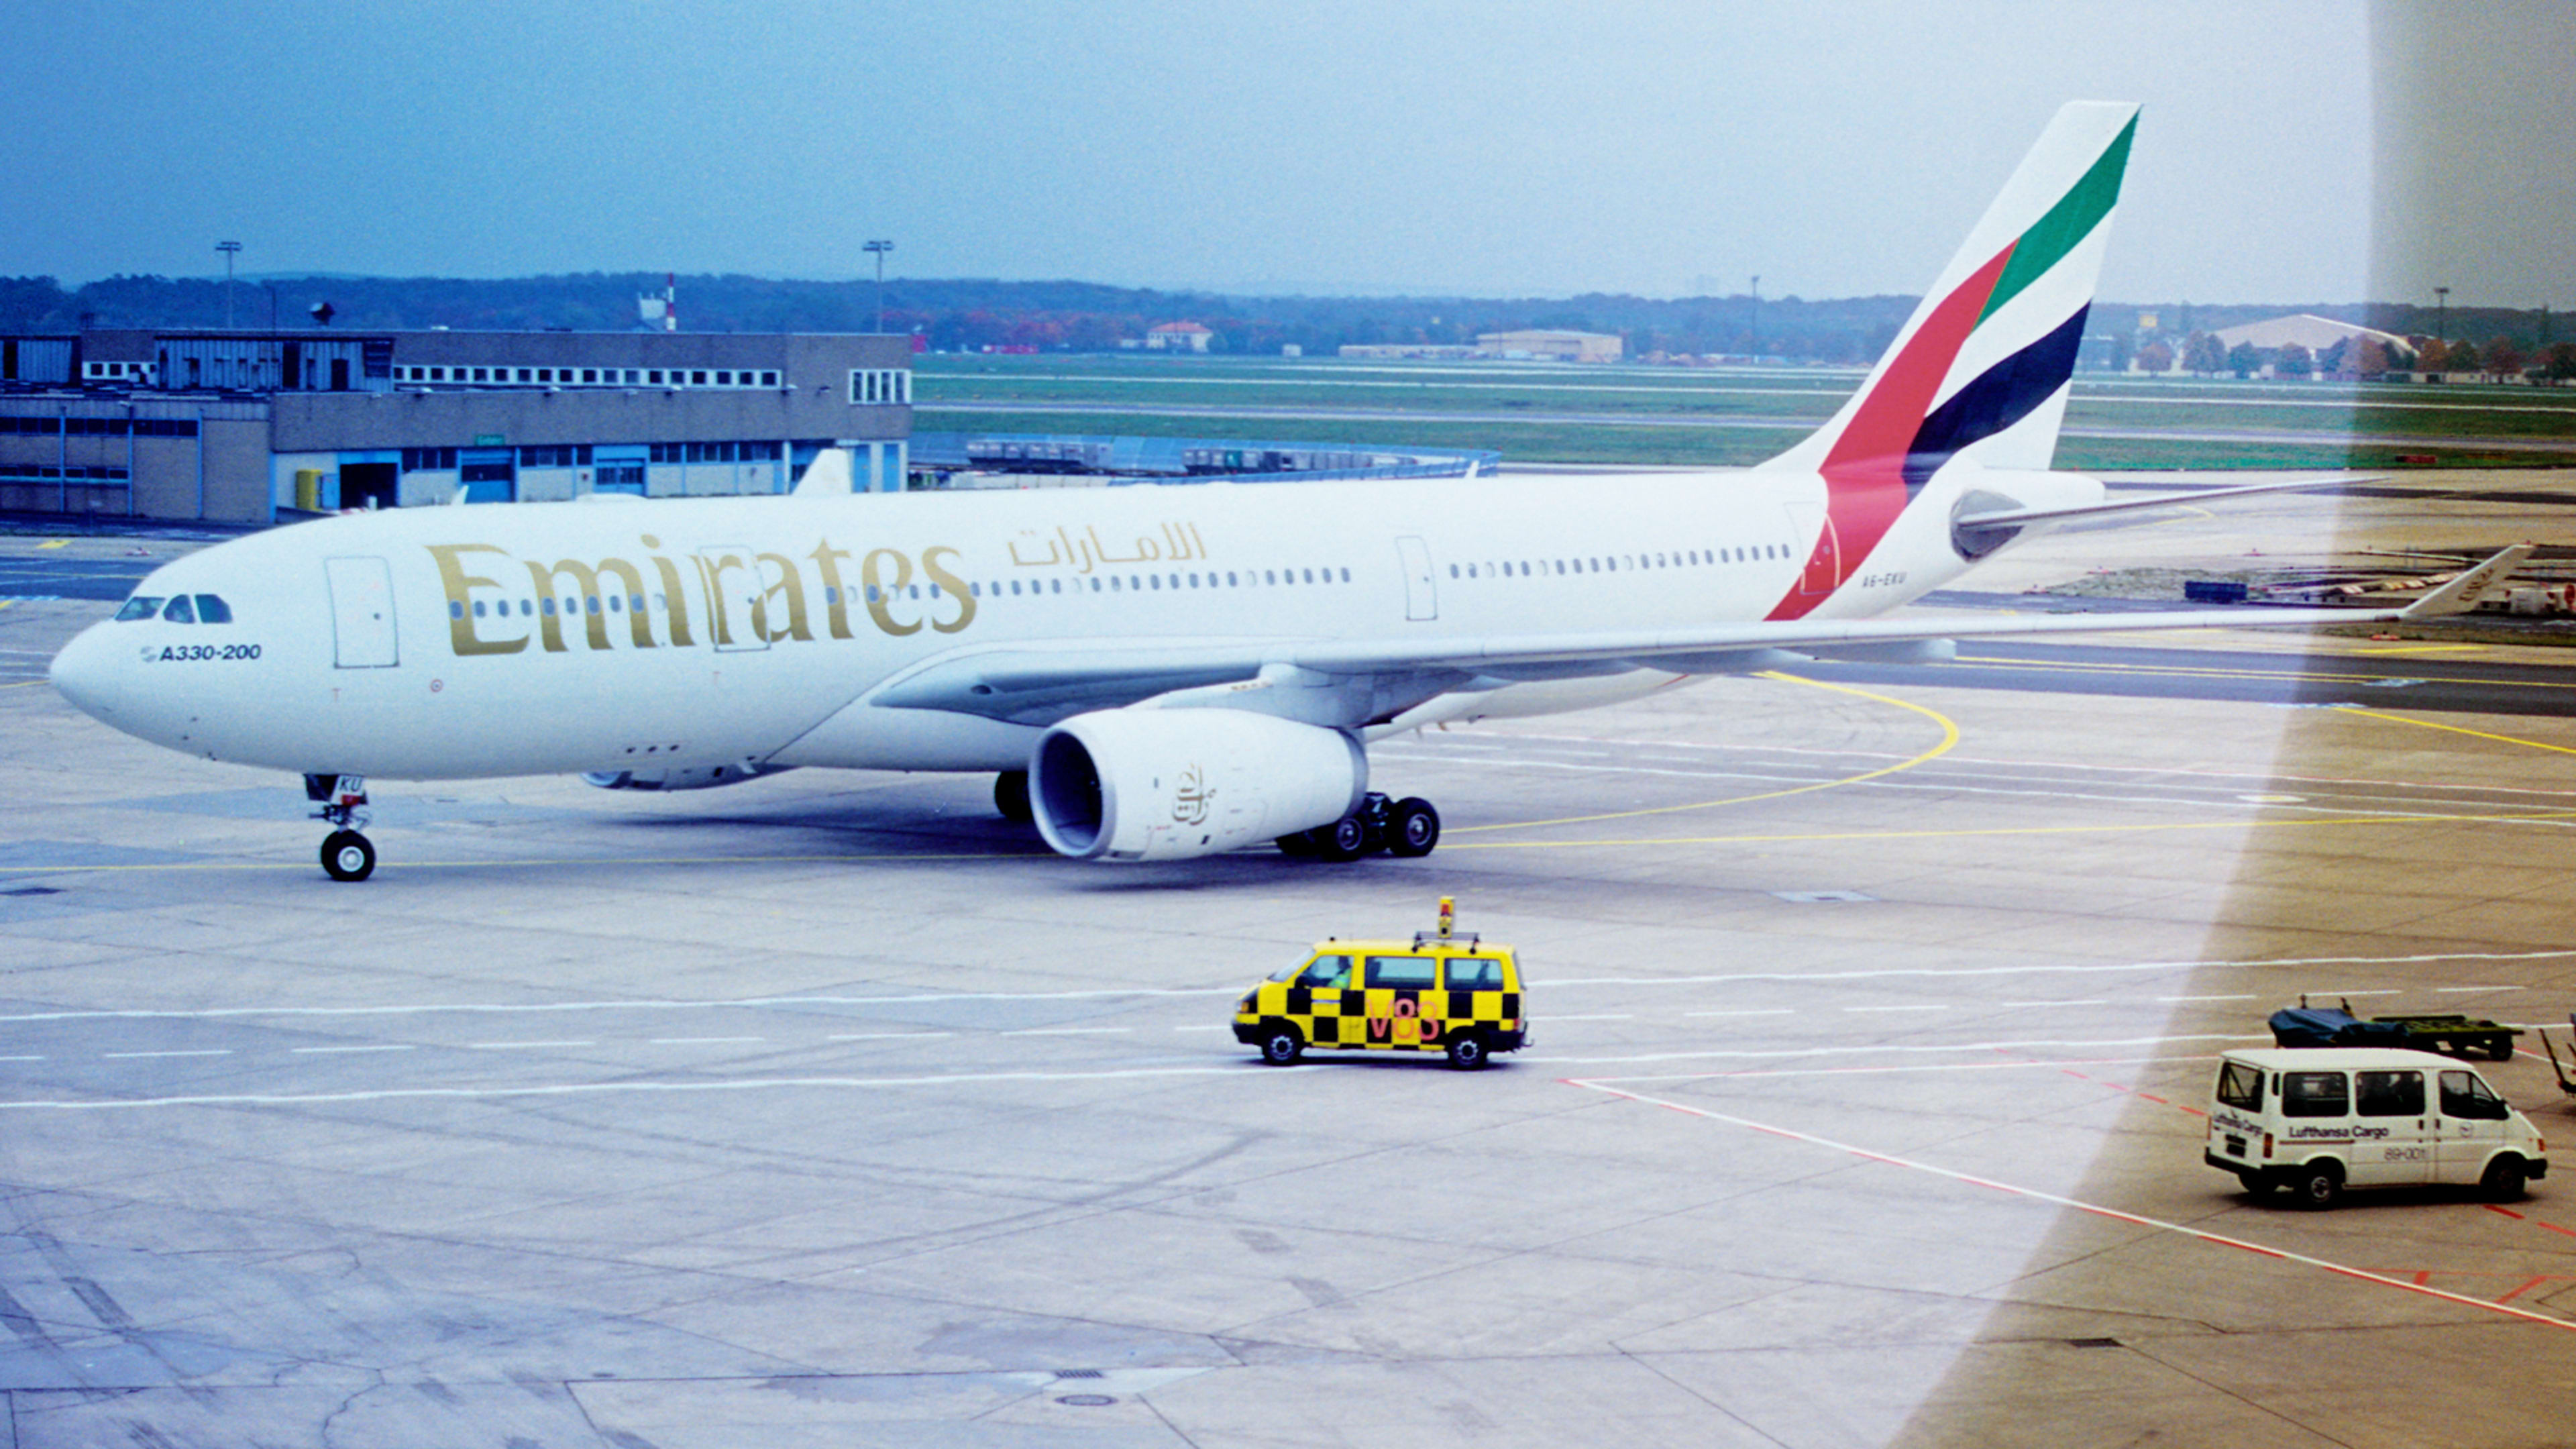 Emirates flight quarantined at JFK with 100 passengers “coughing nonstop”